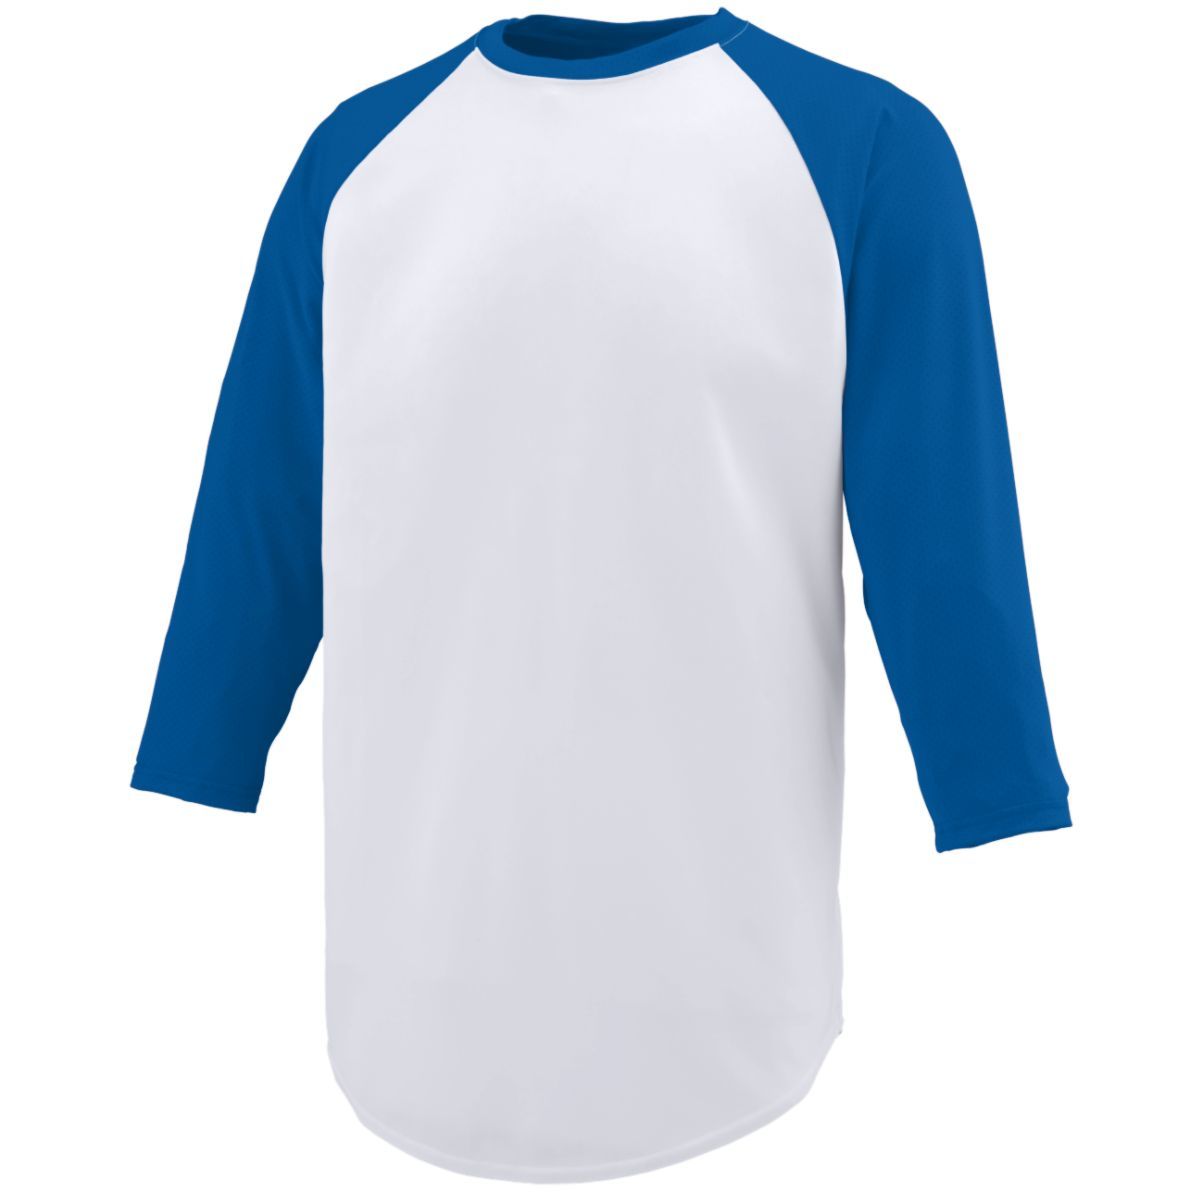 Augusta Sportswear Nova Jersey in White/Royal  -Part of the Adult, Adult-Jersey, Augusta-Products, Baseball, Shirts, All-Sports, All-Sports-1 product lines at KanaleyCreations.com